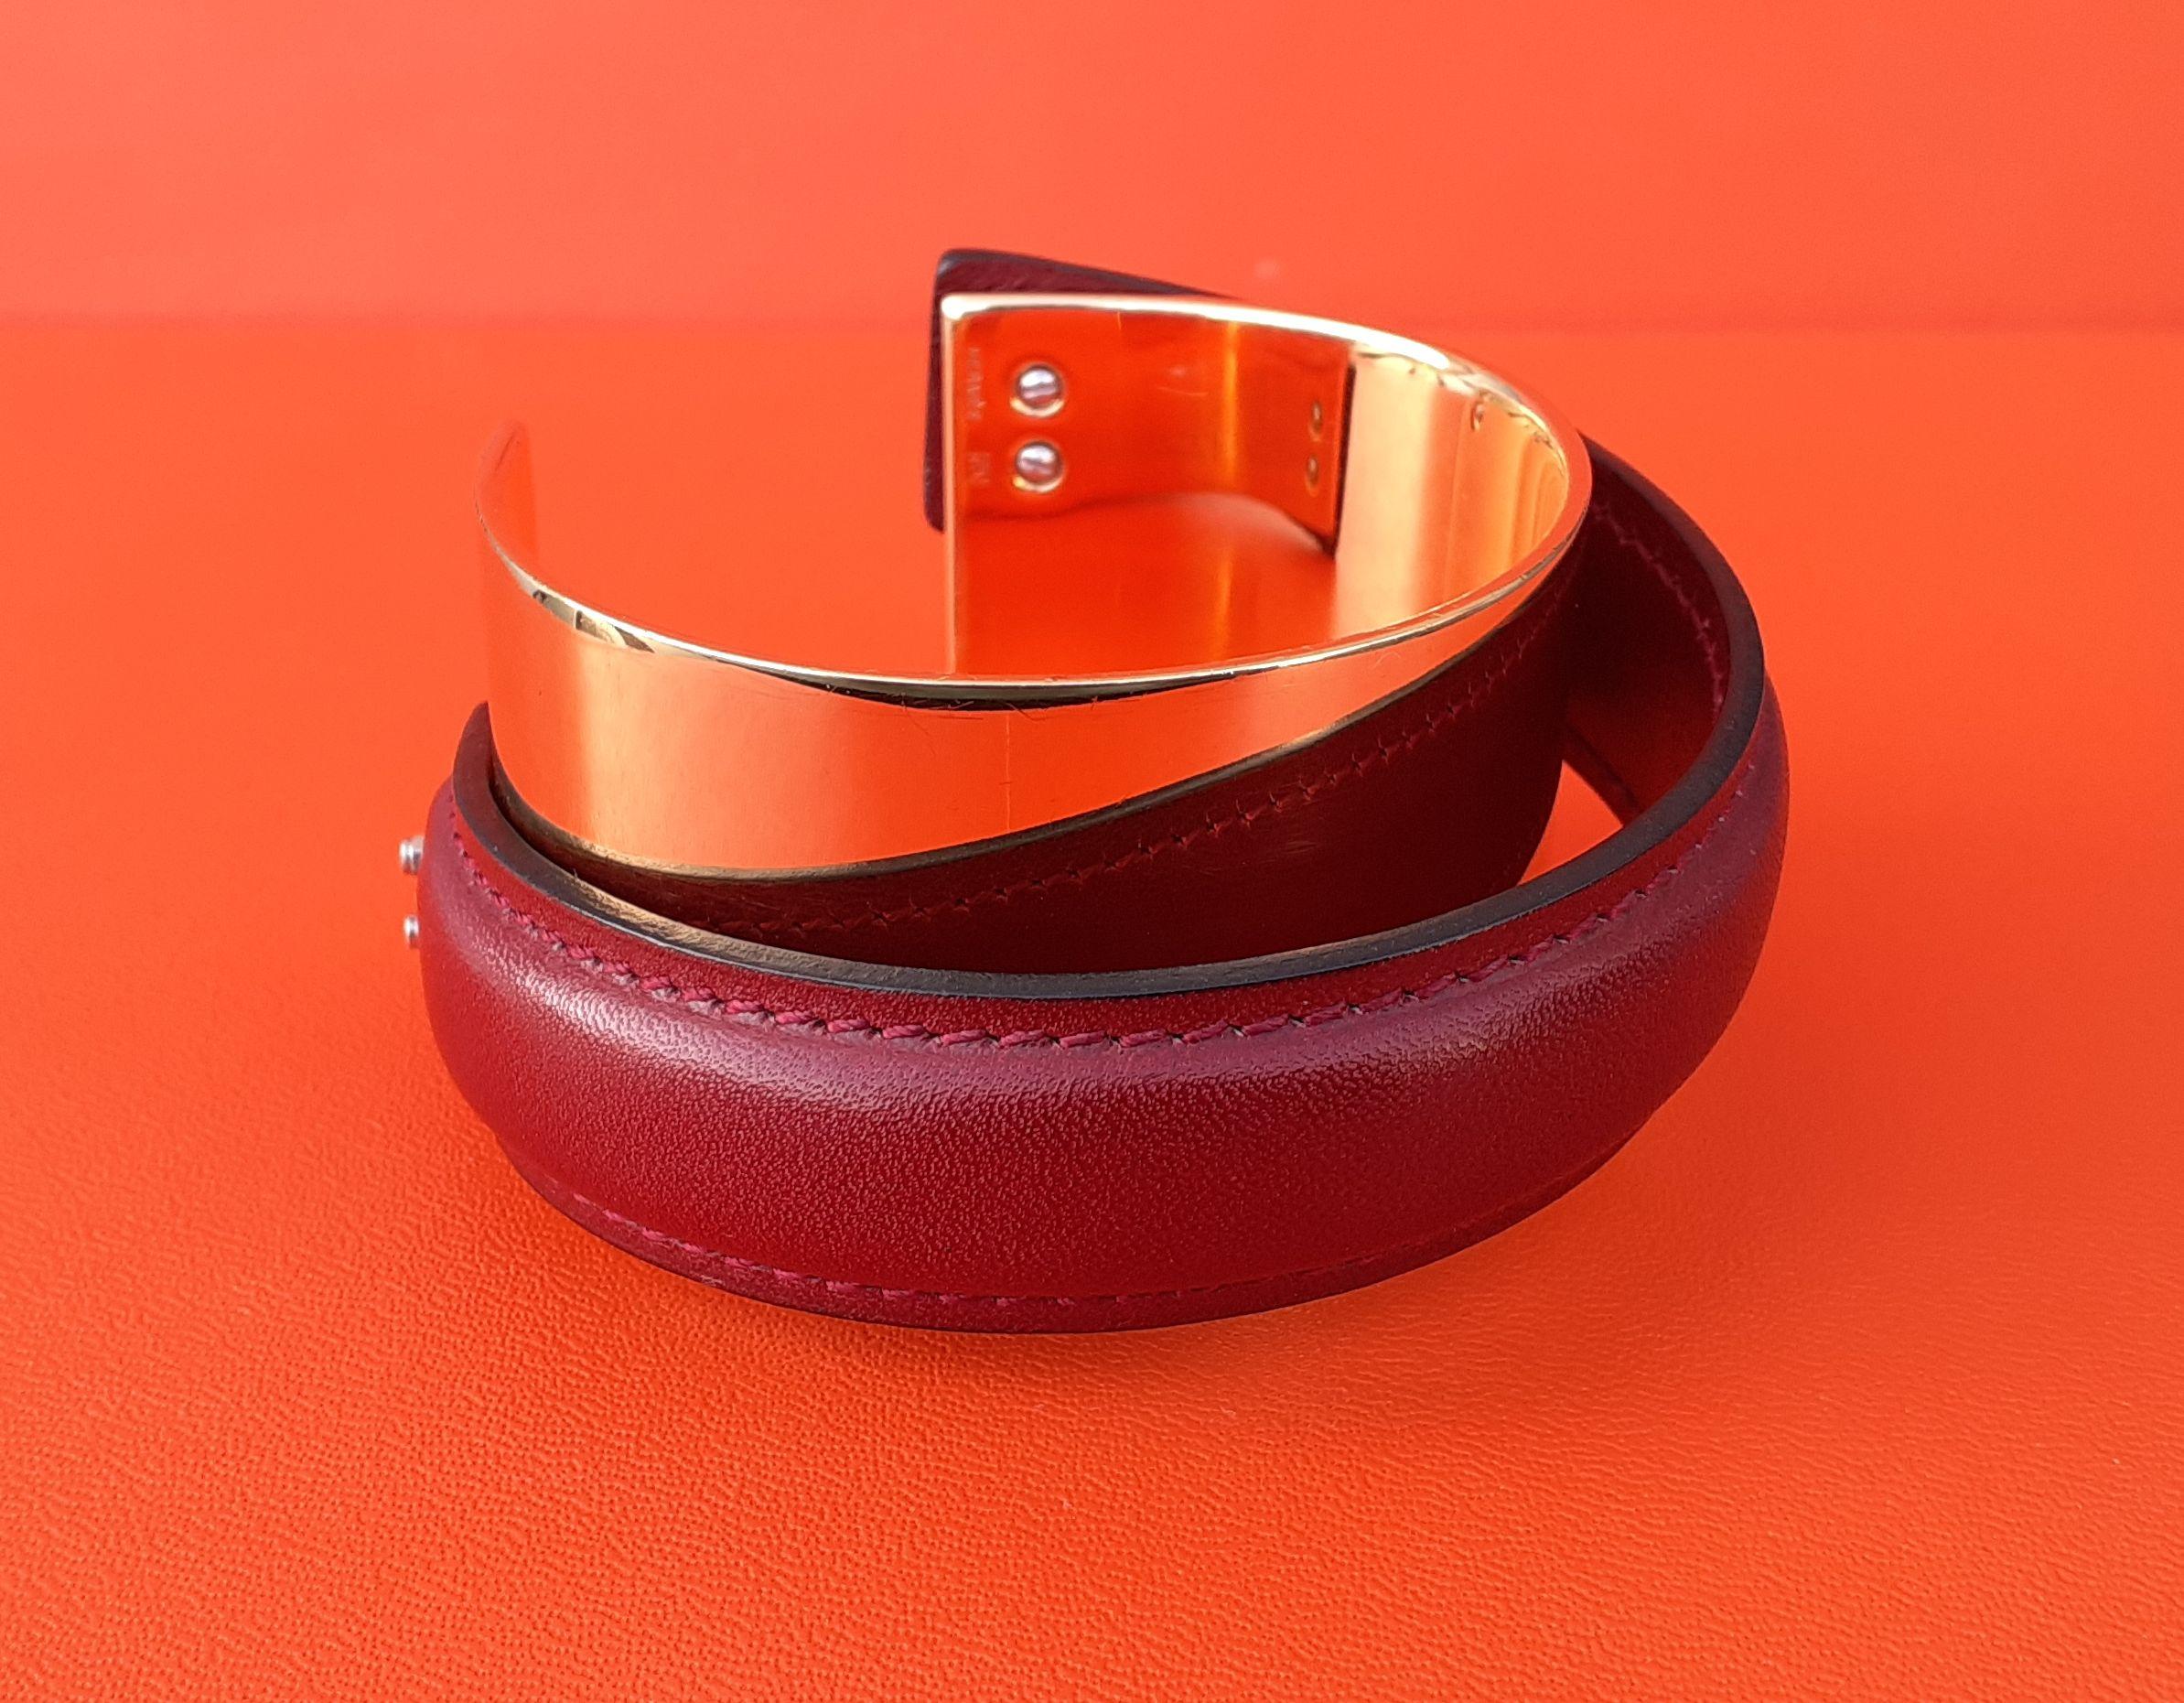 Exceptional Hermès Cuff Bracelet Golden Hdw and Rouge H Box Leather Size L For Sale 3